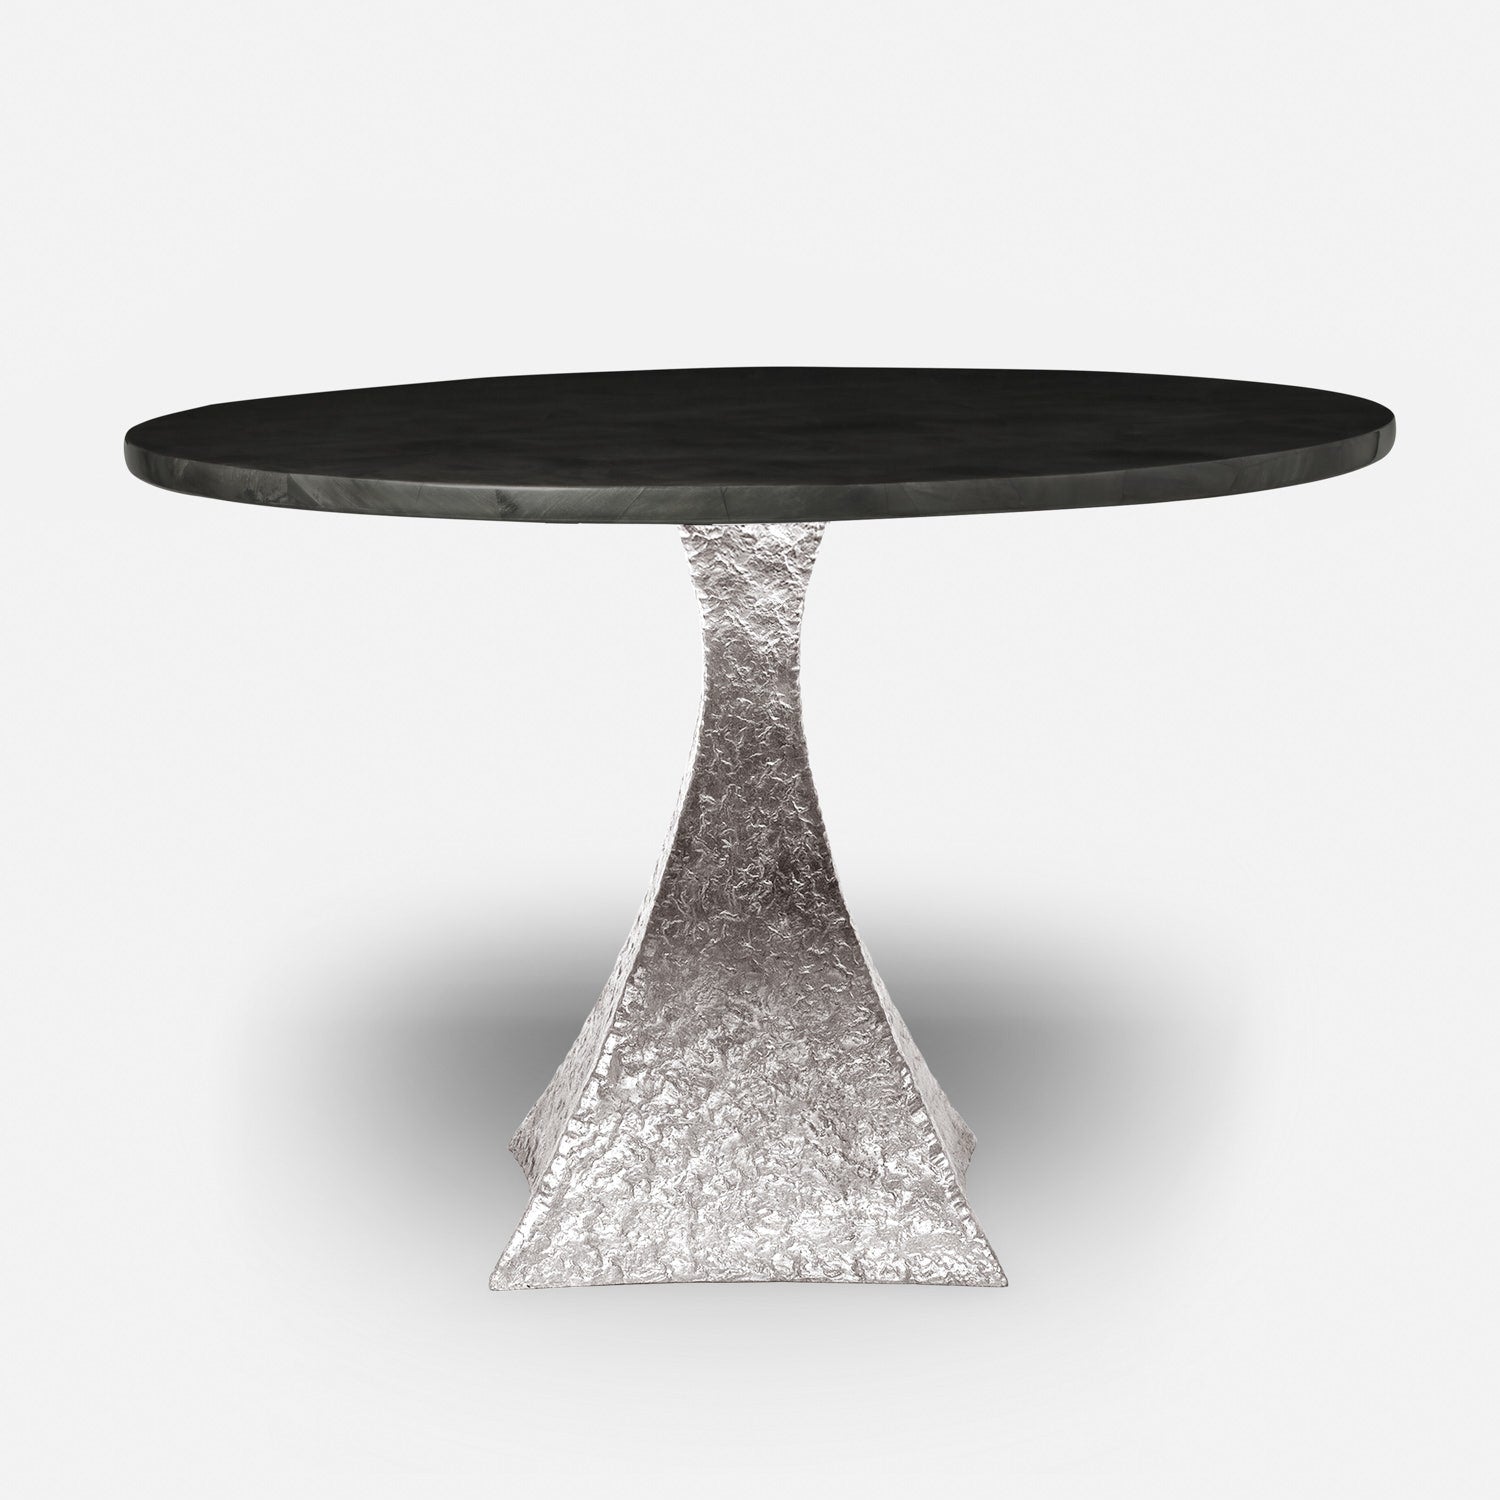 Made Goods Noor 48" x 30" Bumpy Cool Silver Iron Dinning Table With Round Dark Faux Horn Table Top